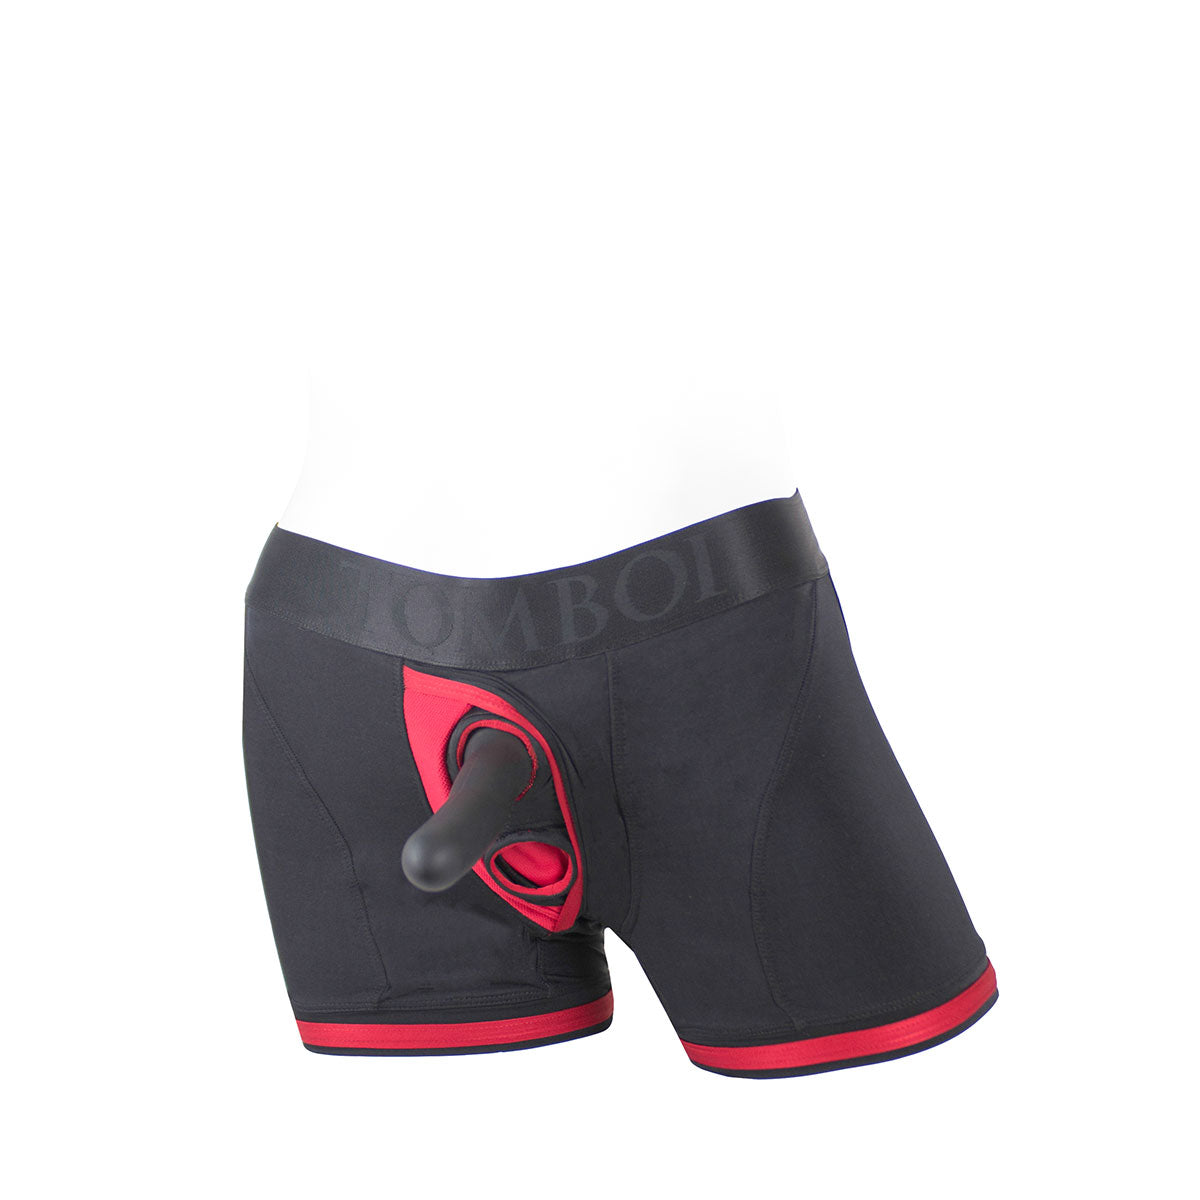 SpareParts Tomboii Black-Red Nylon - Small Intimates Adult Boutique